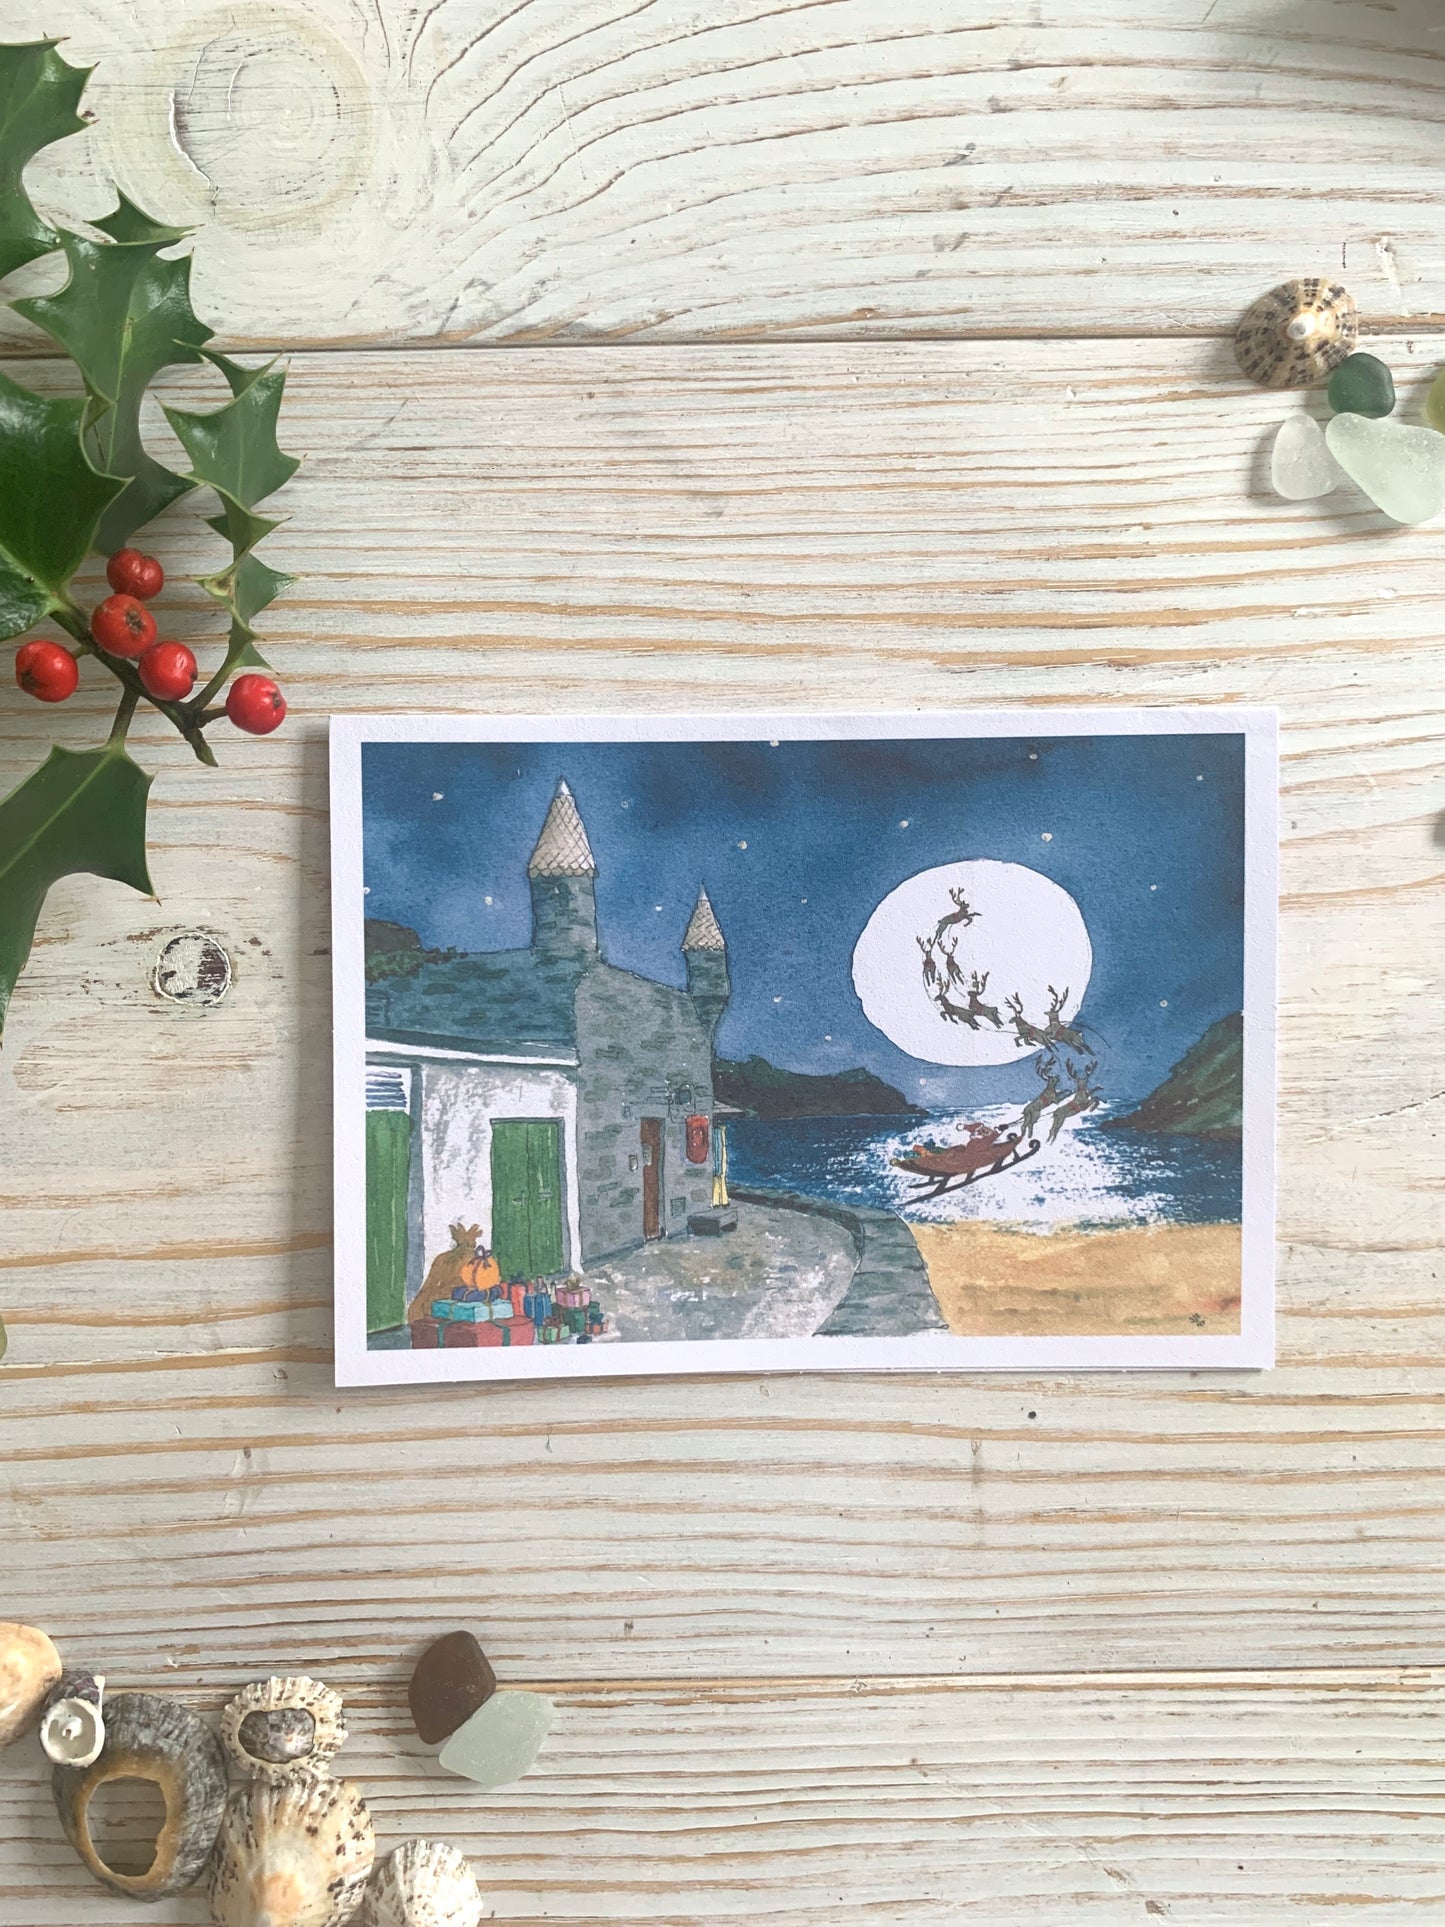 A Christmas card depicting Santa and his sleigh flying away from Readymoney